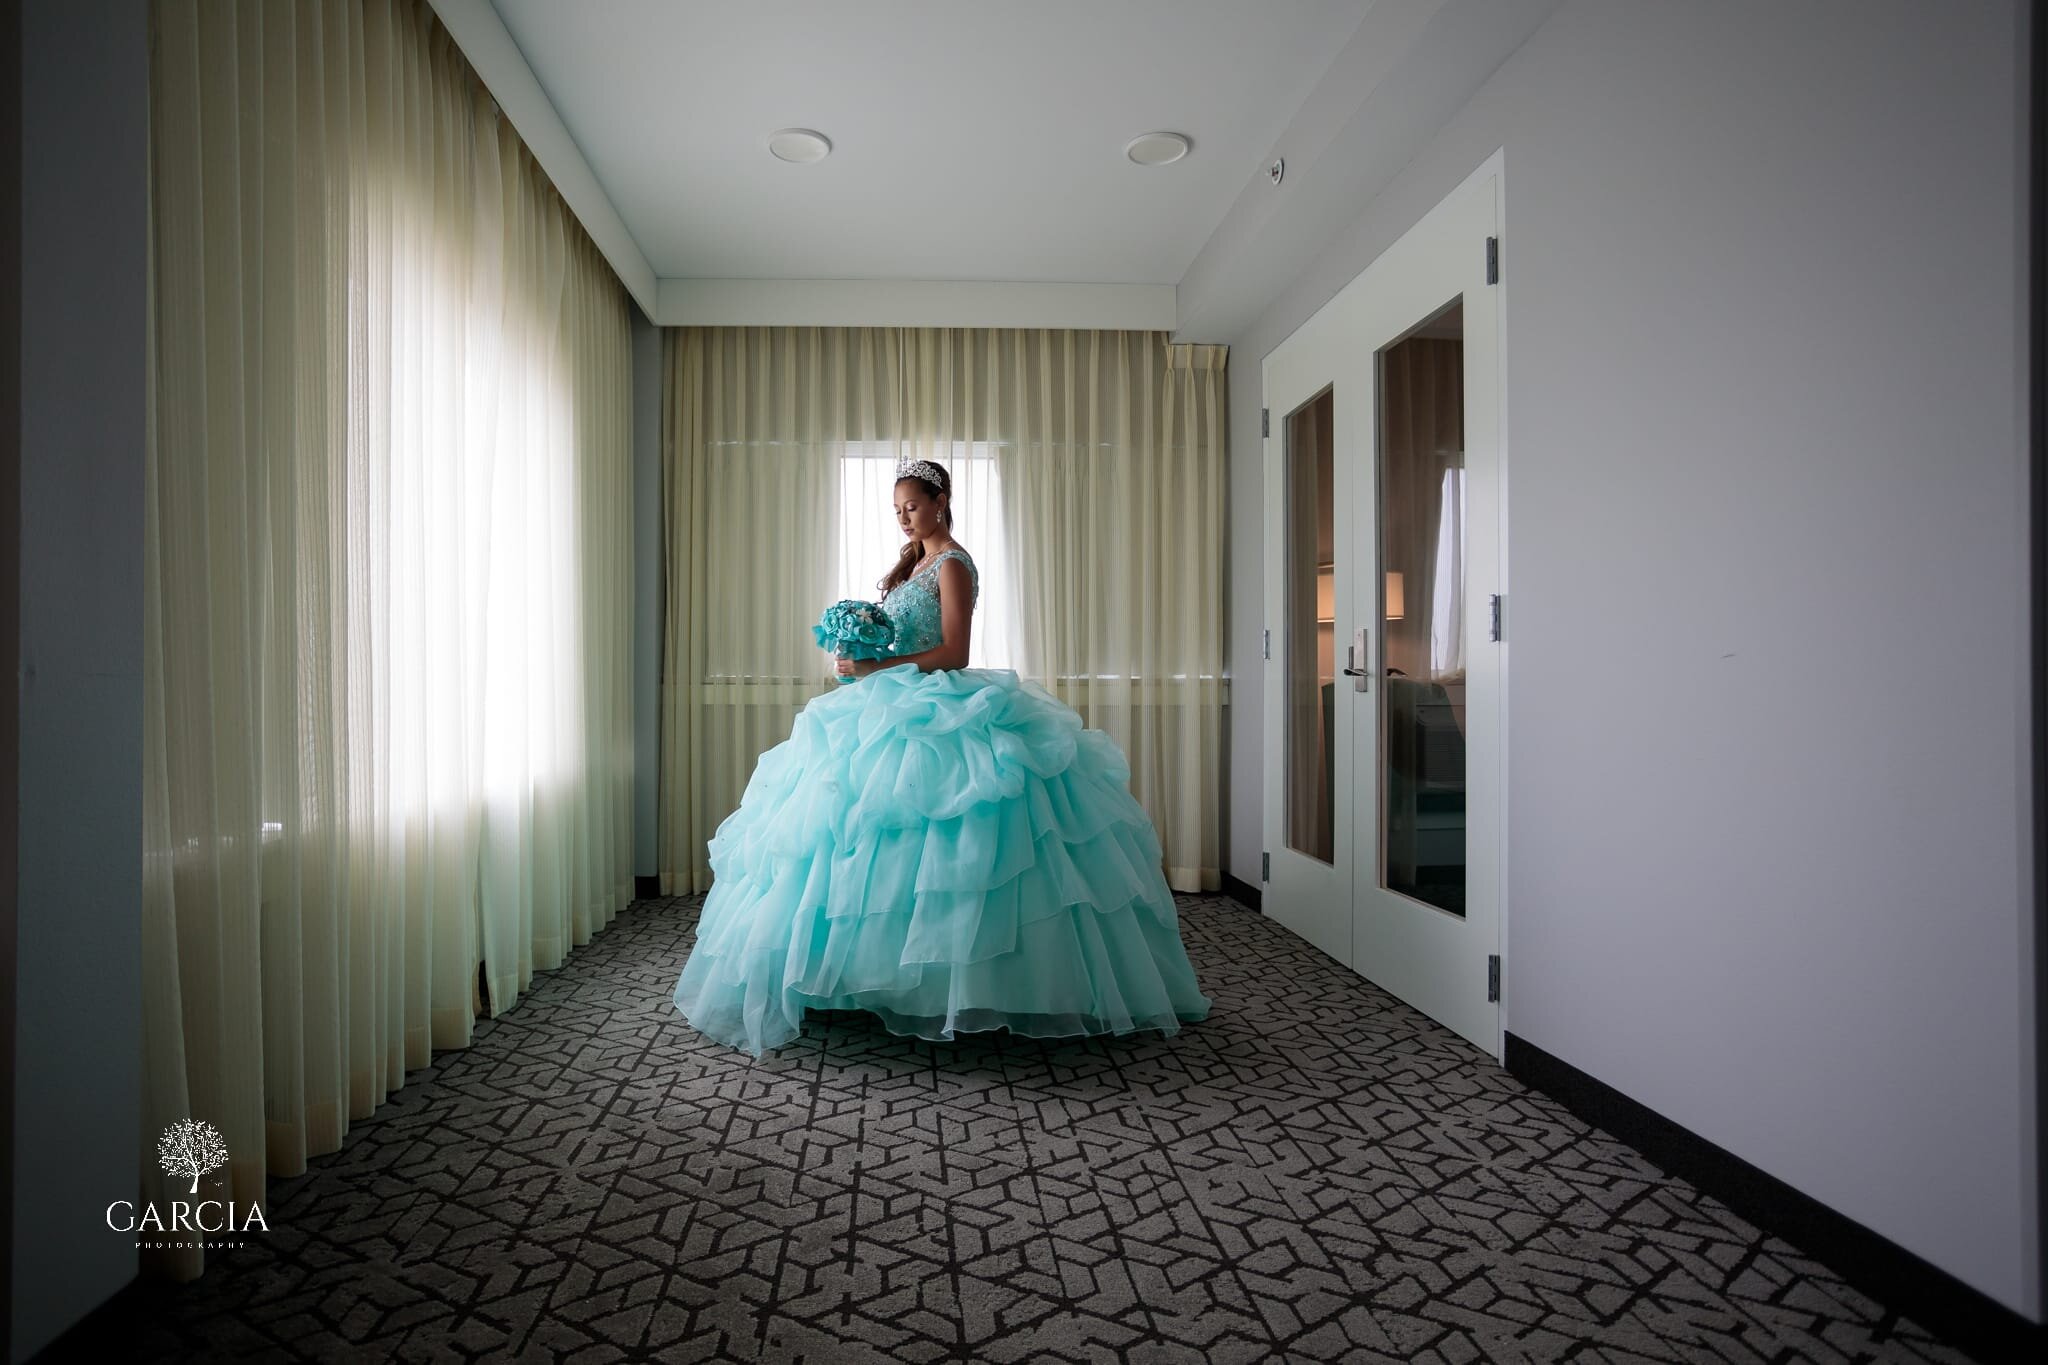 Taylor-Quince-Garcia-Photography-0159.jpg